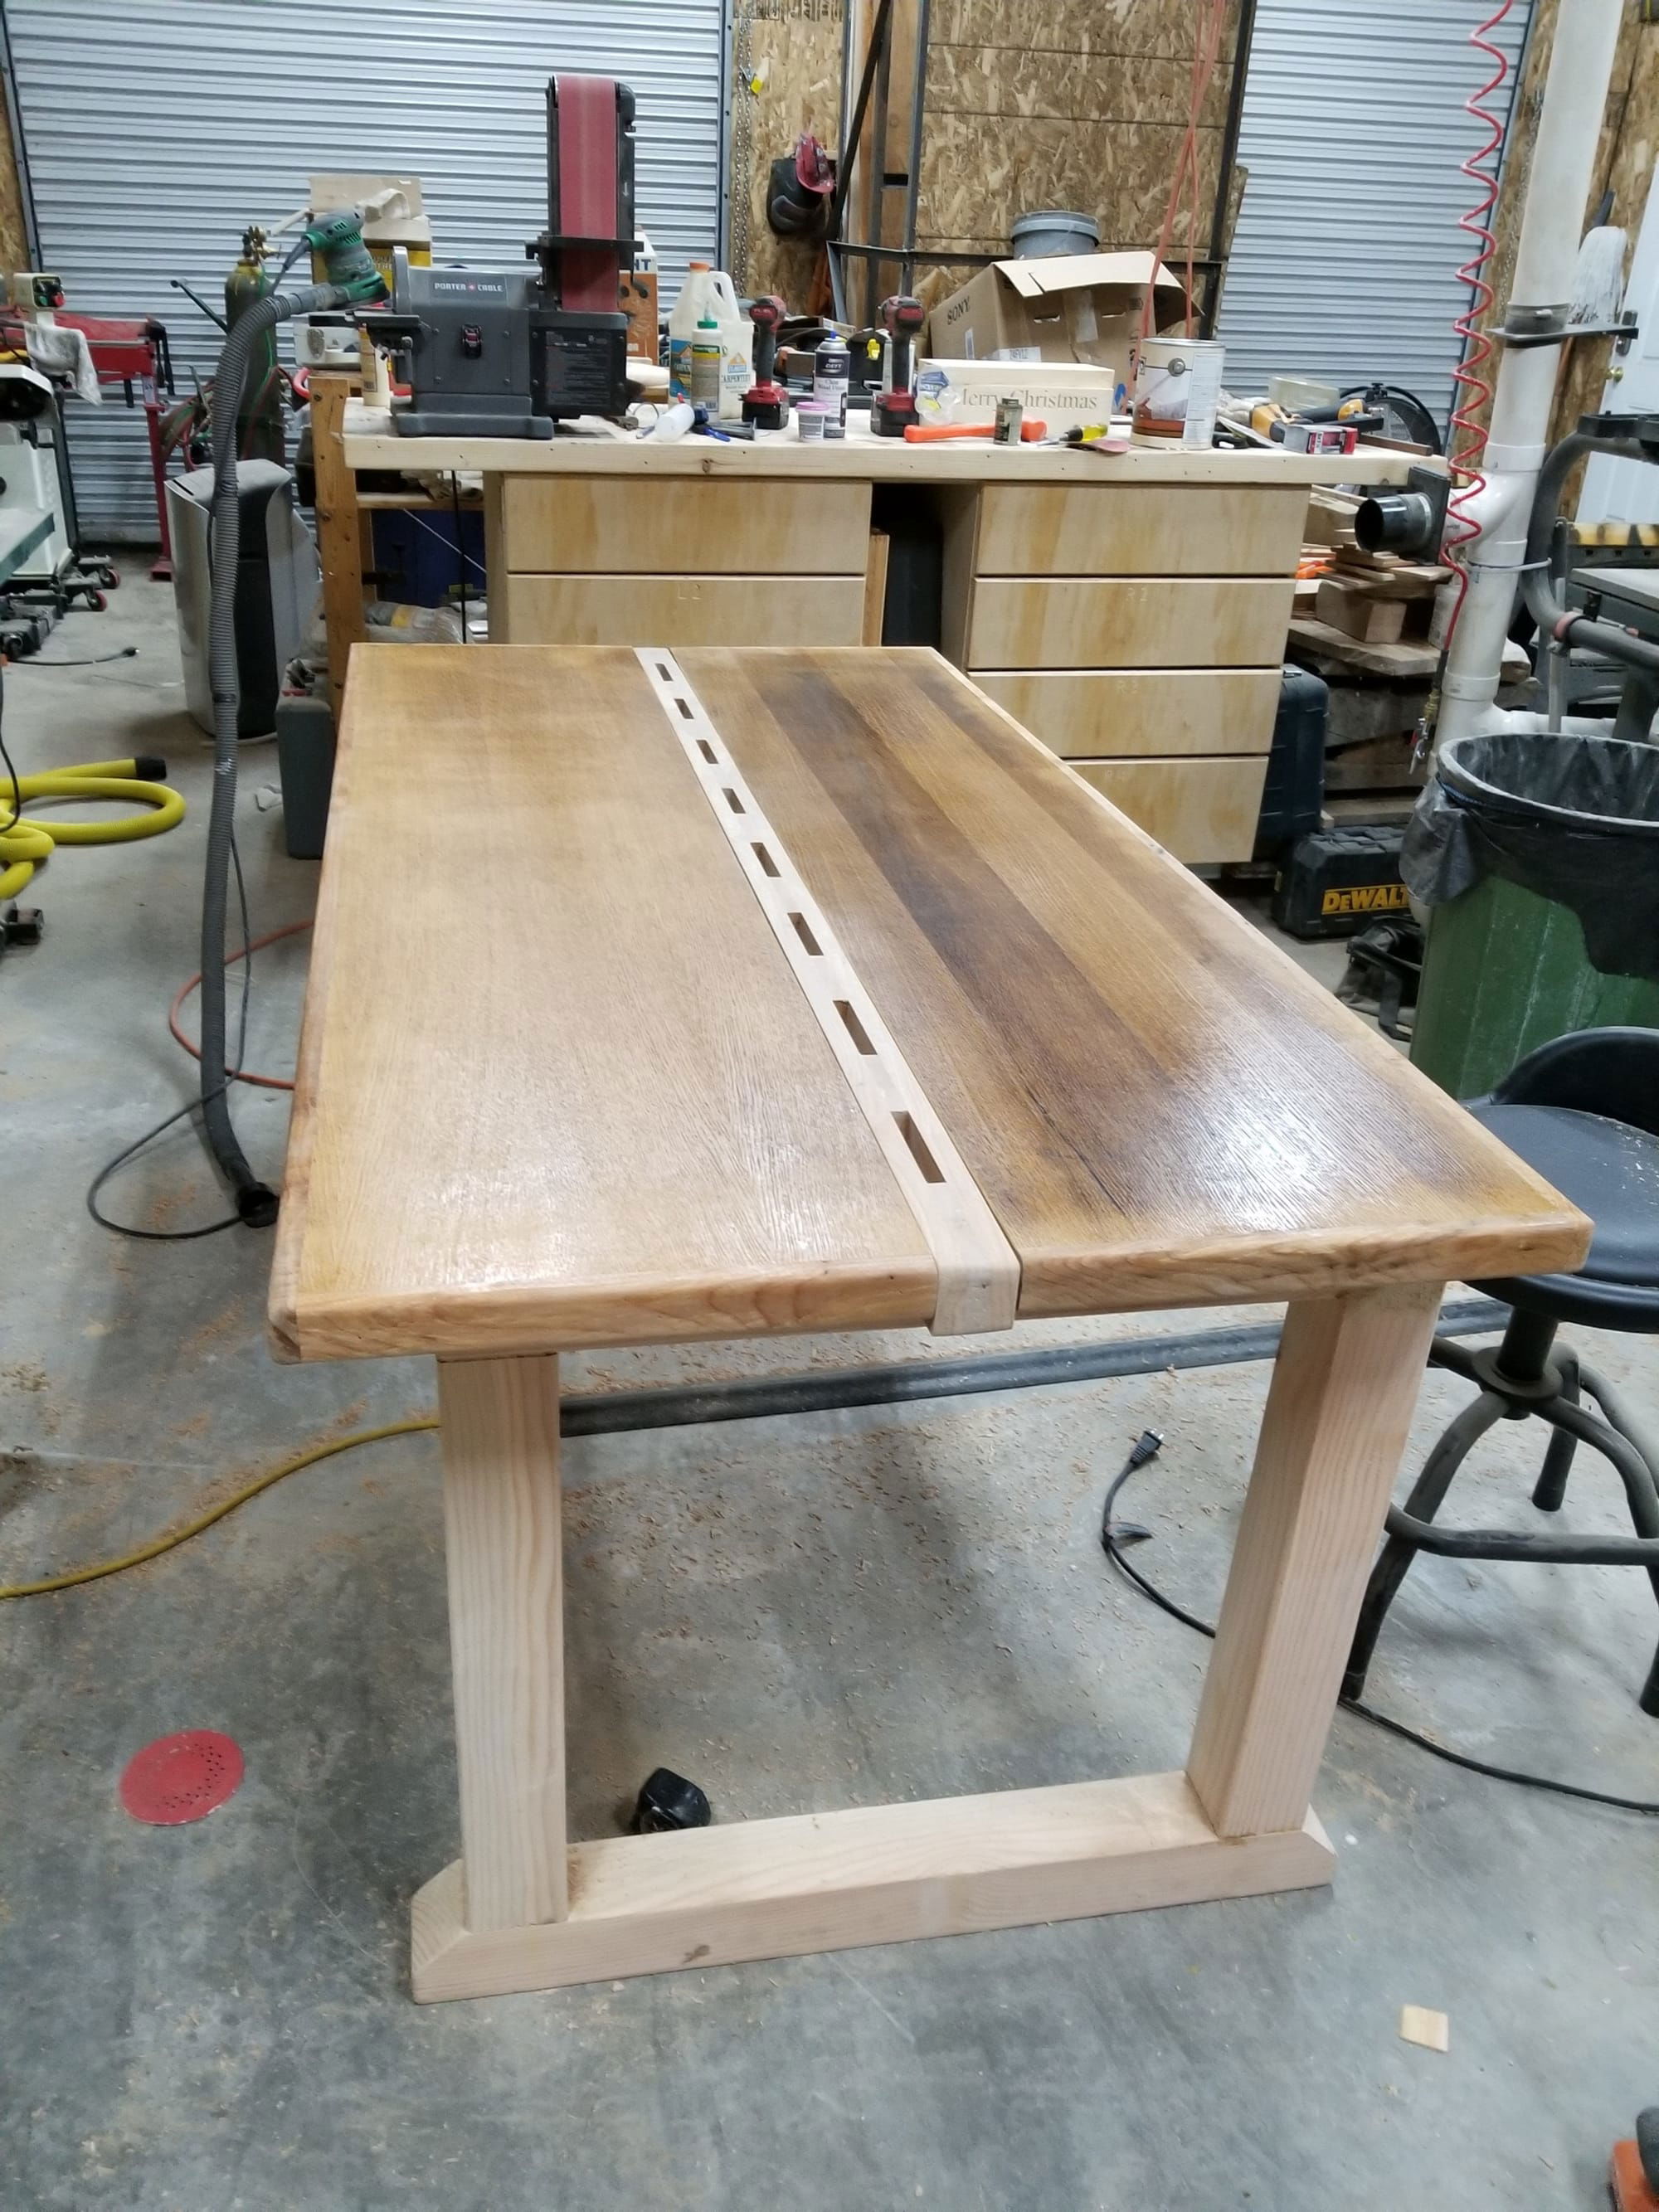 one of my work benches made from an old commercial Door and 4x4 Douglas fir